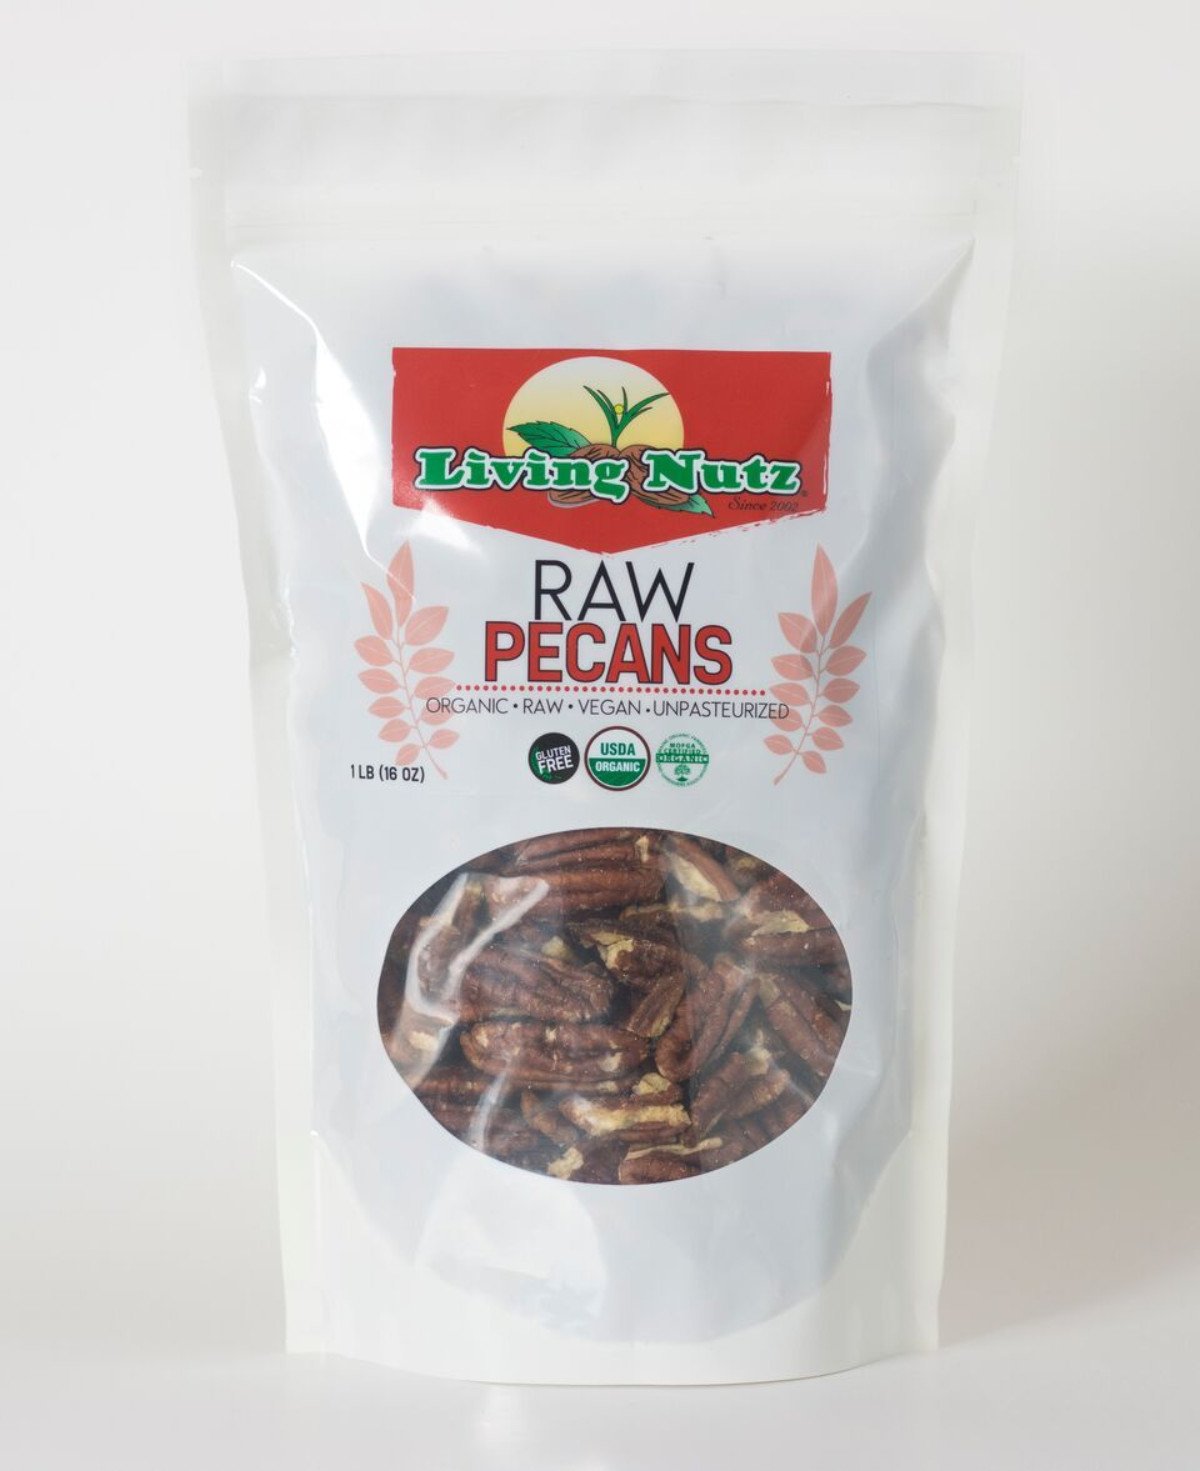 Raw organic pecans grown in the US. Pecans are a healthy type of nut.